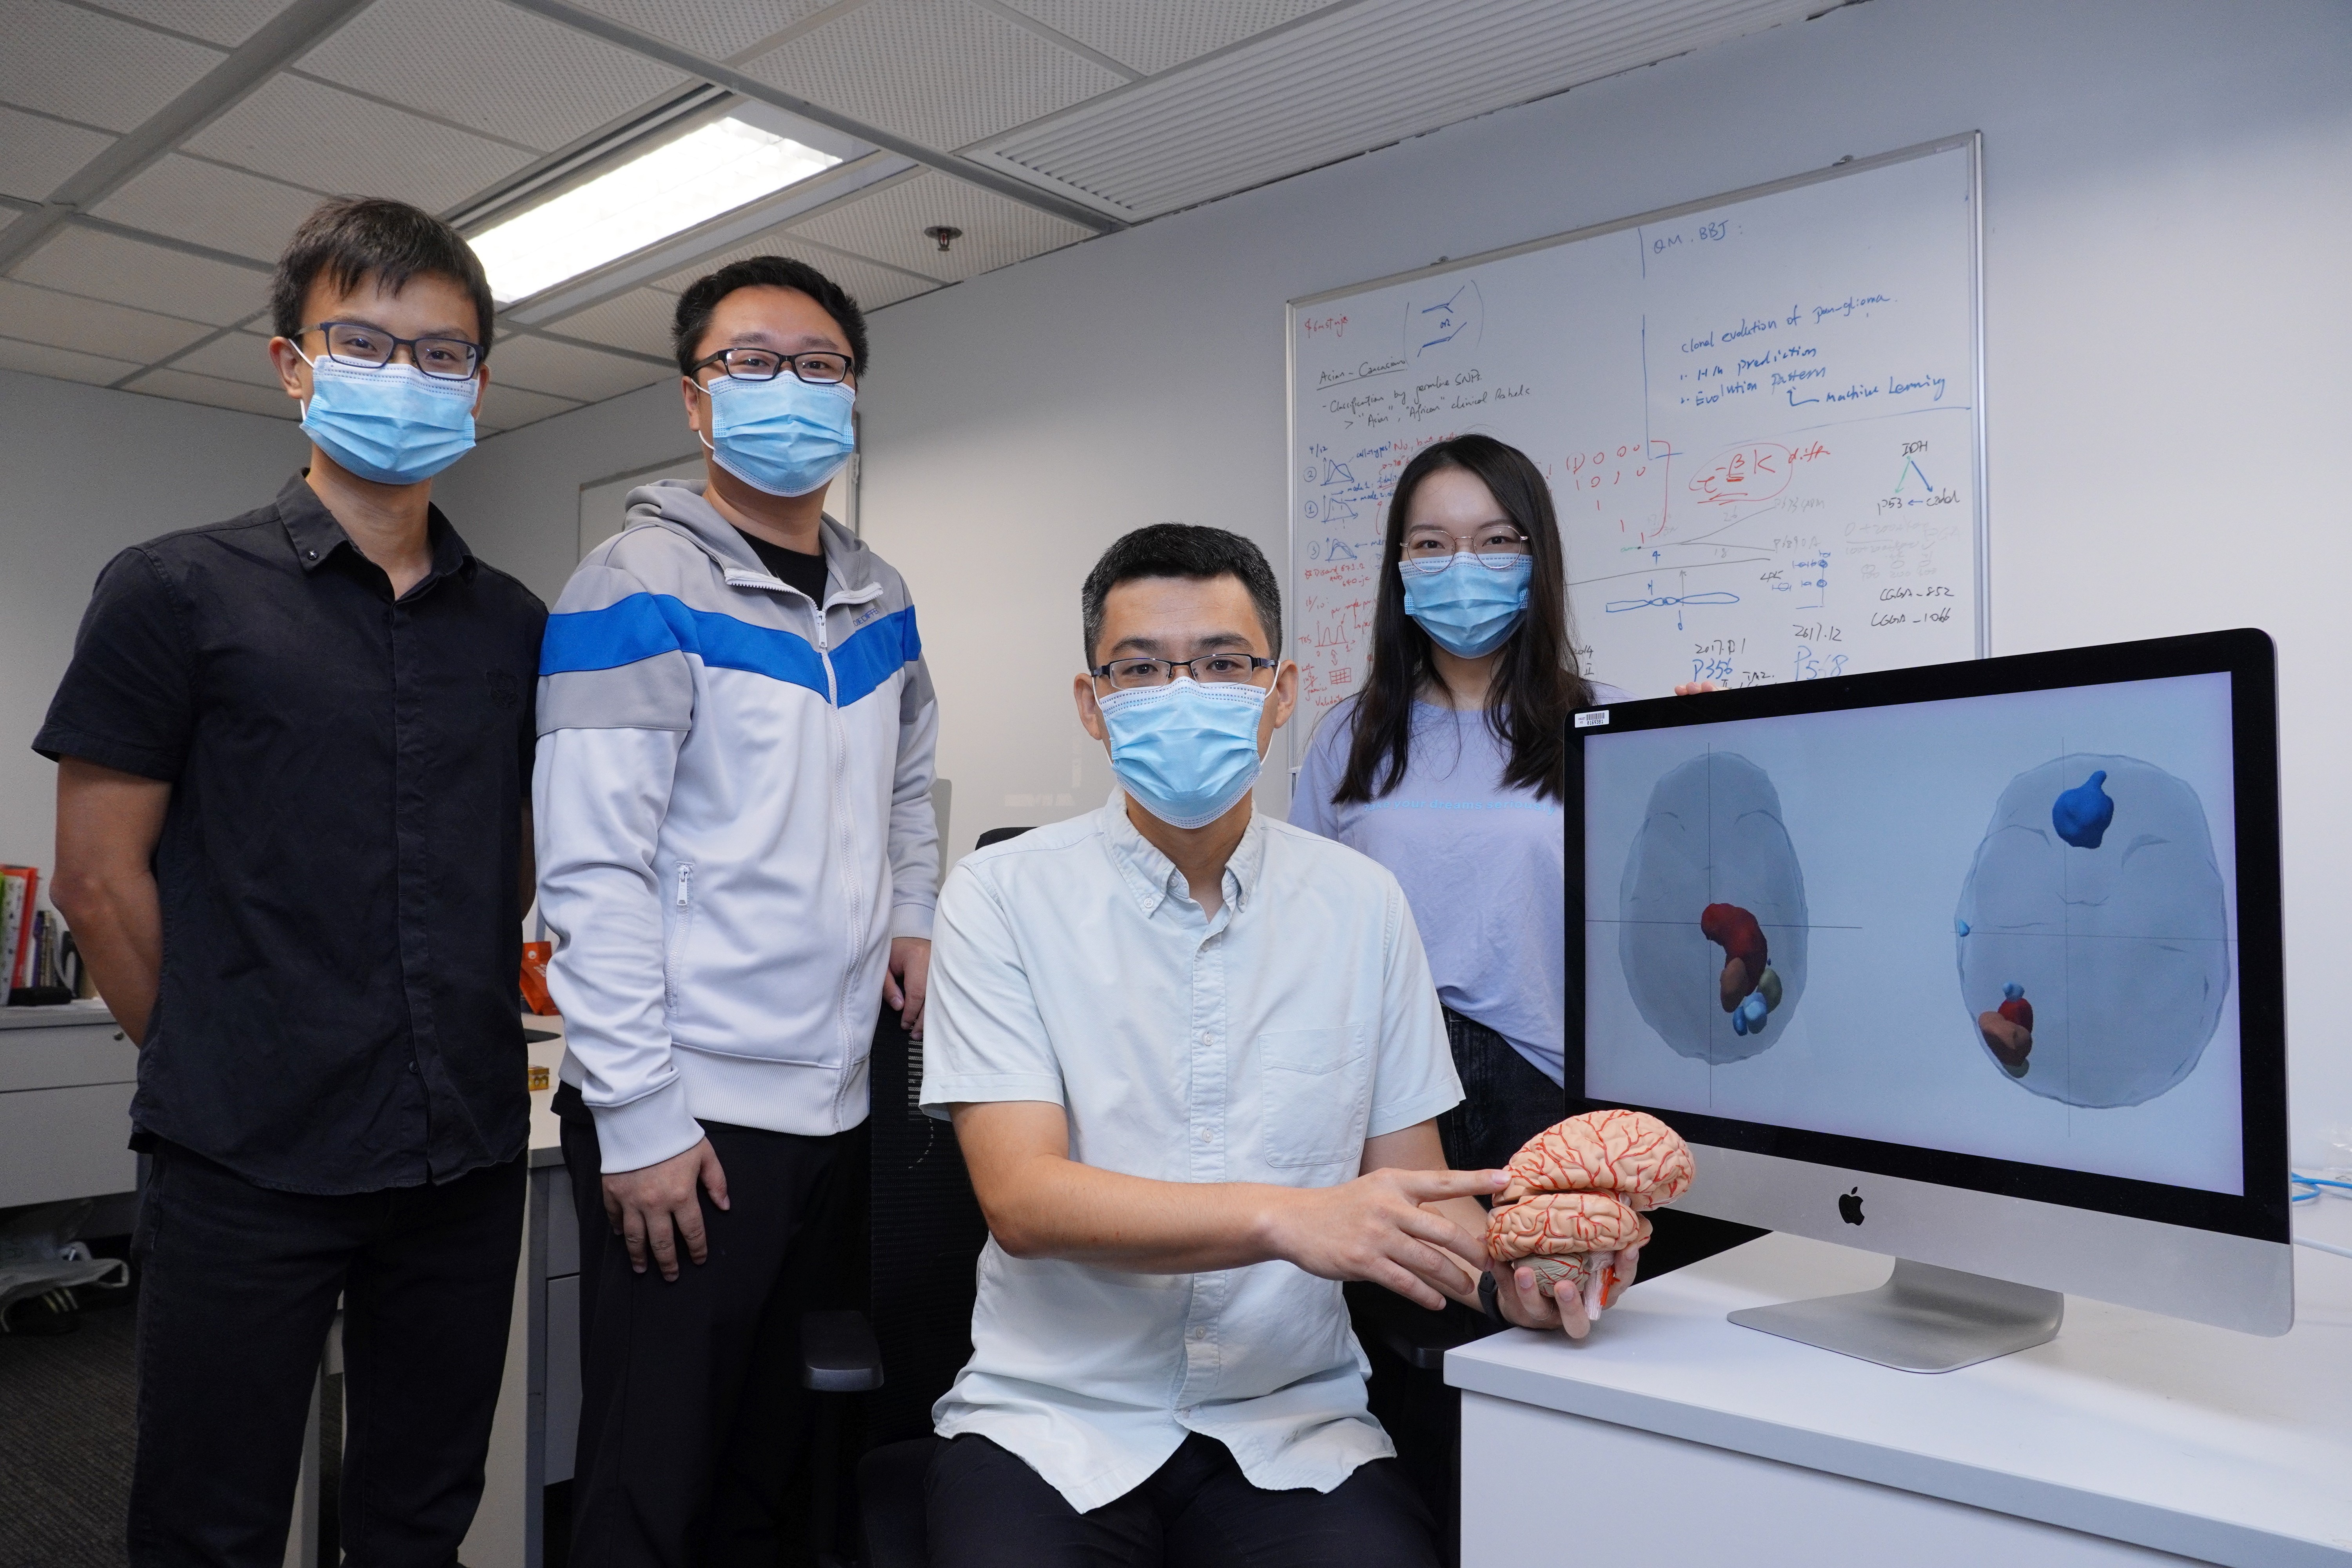 Prof. WANG Jiguang (second right) and his research team members